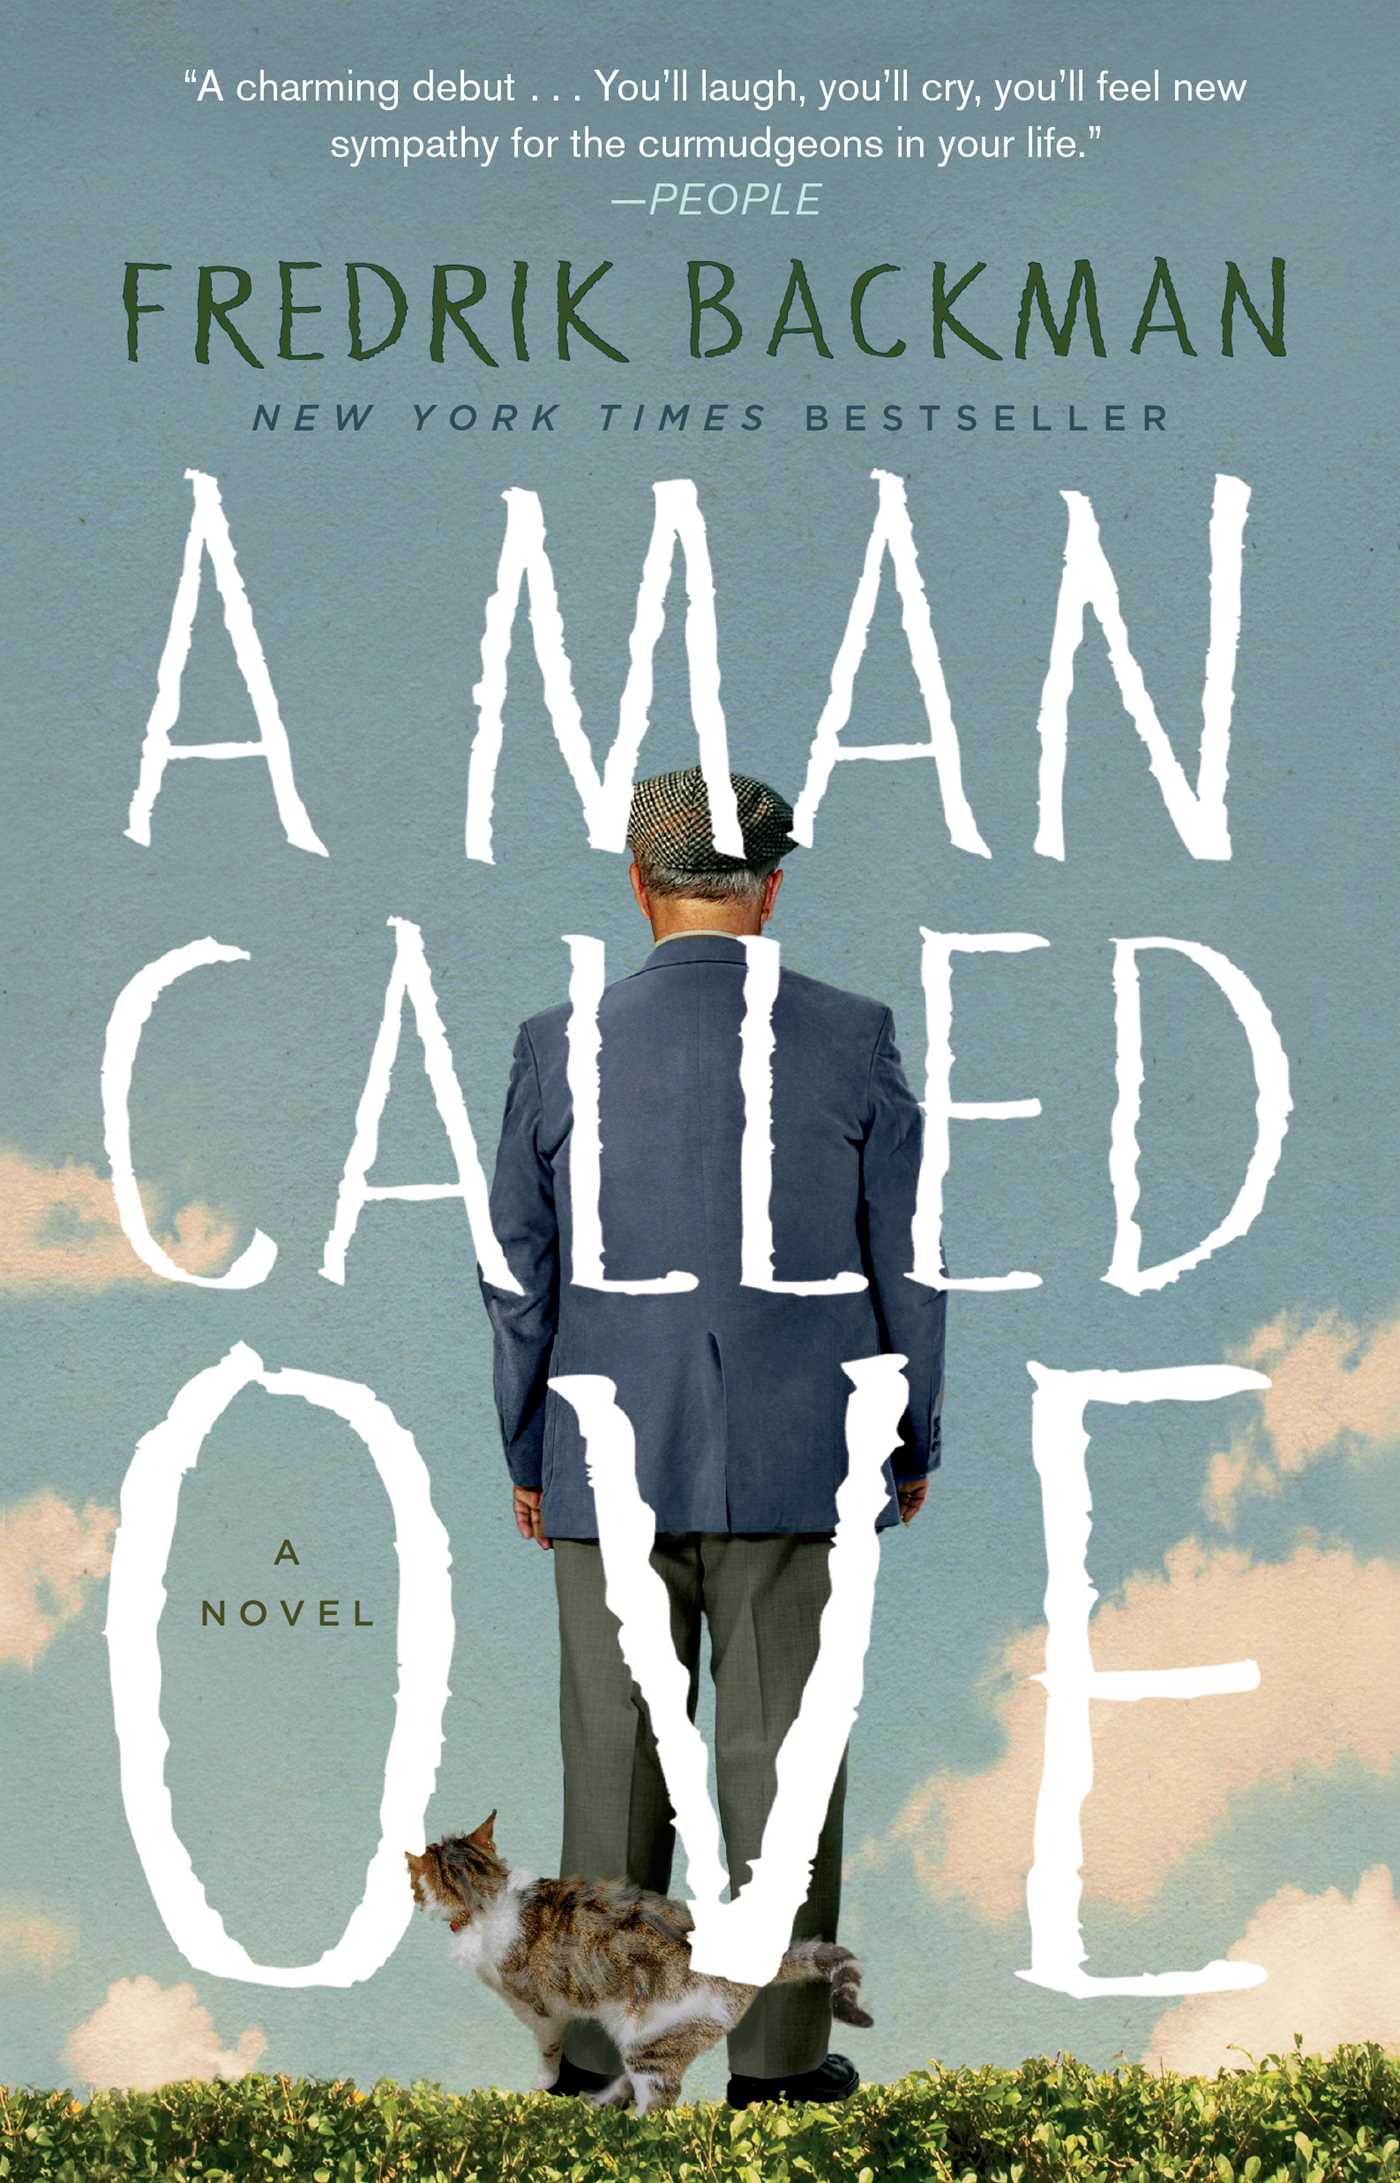 A Man Called Ove cover